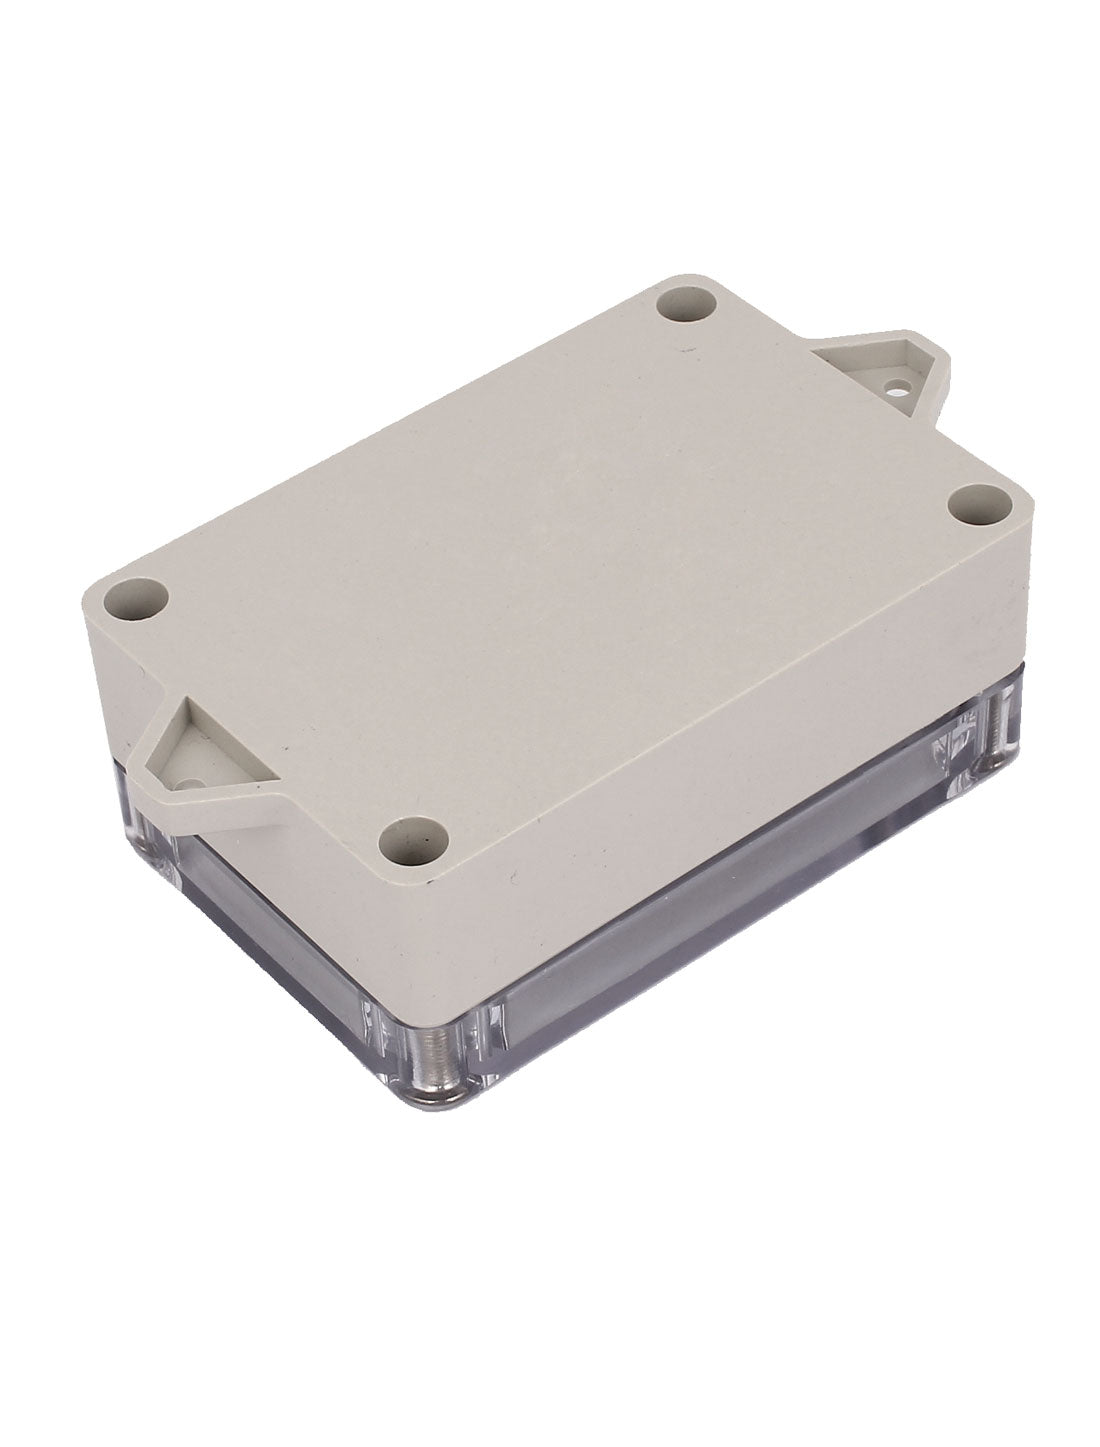 uxcell Uxcell 100mm x 68mm x 40mm Dustproof IP65 Sealed Joint DIY Project Electrical Junction Box